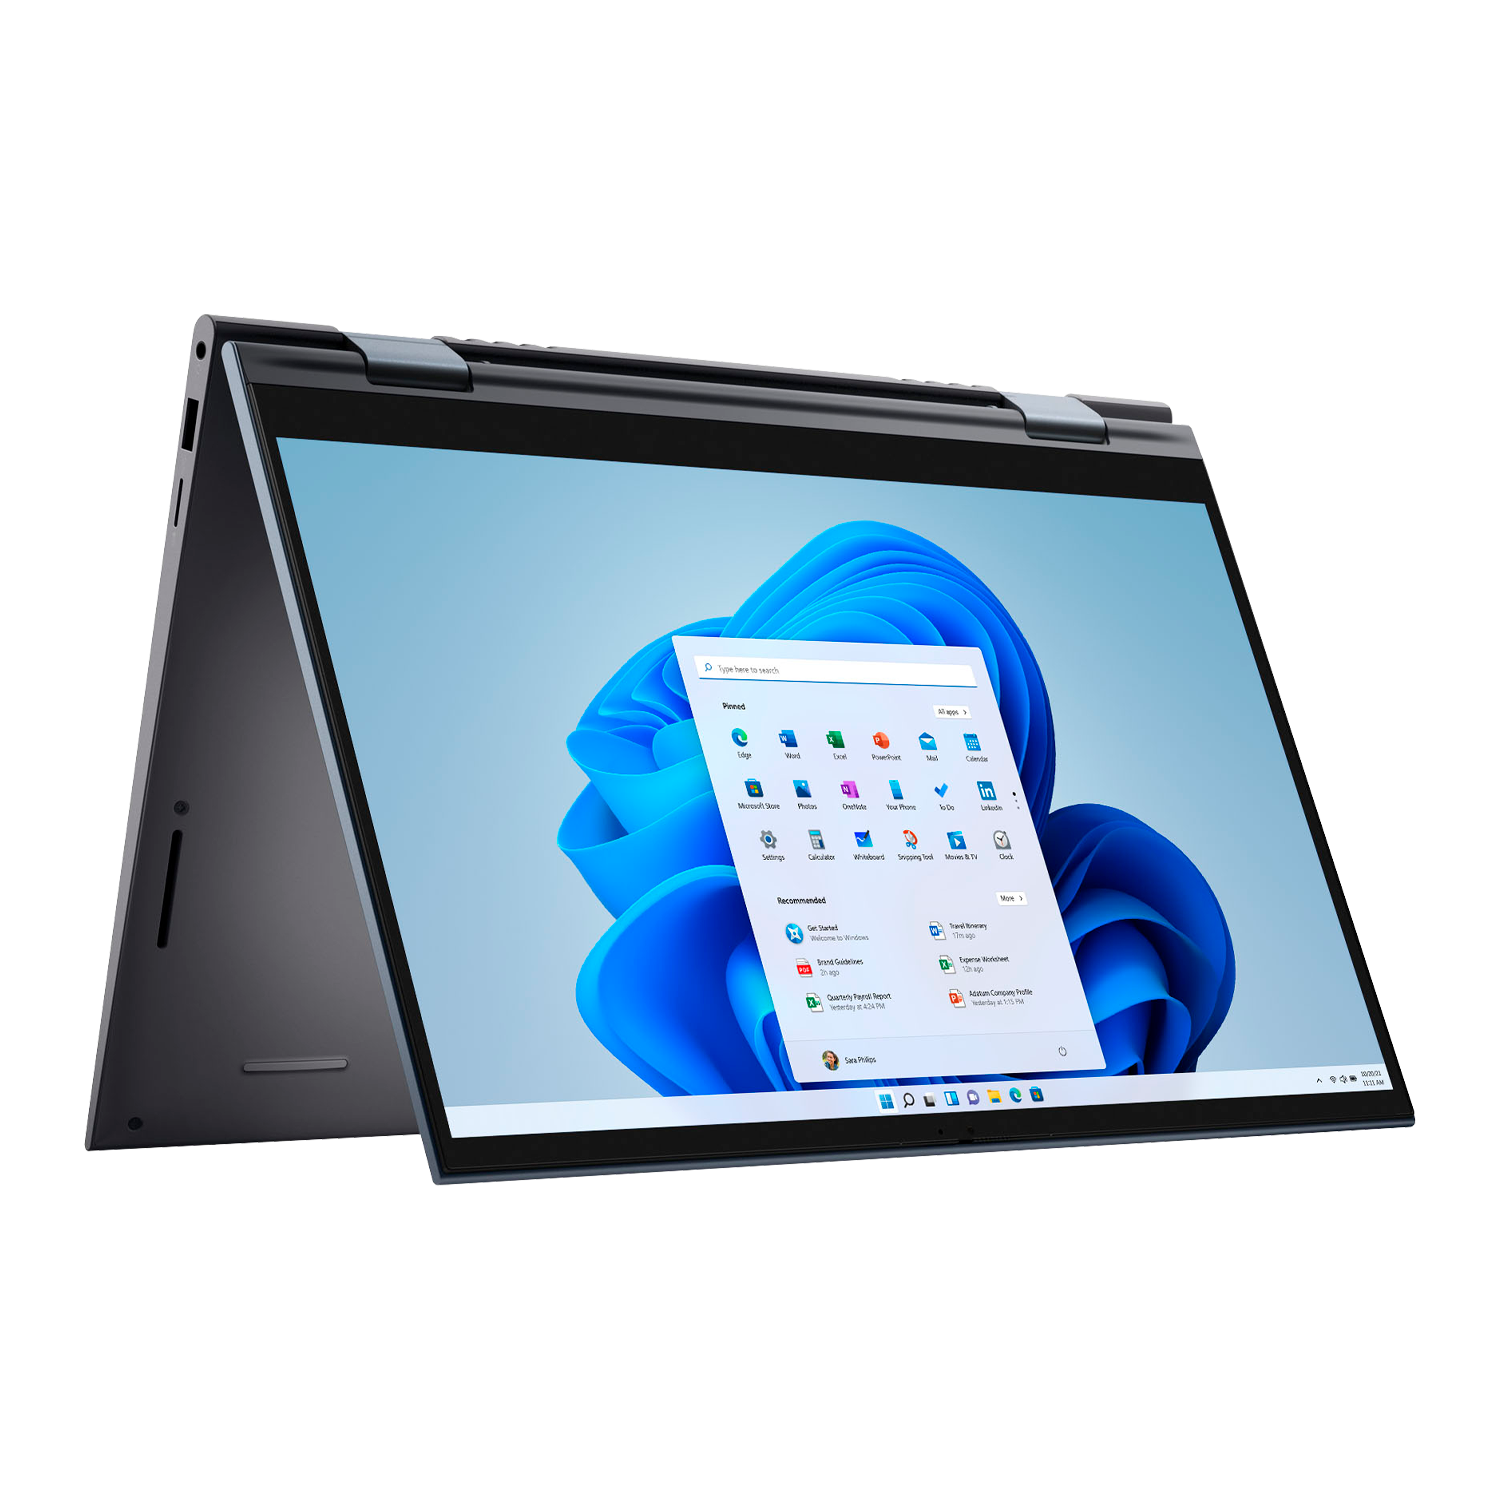 Notebook Dell 7000 2-IN-1 R5 8GB/256SSD/Tela 14"/ Touchscreen